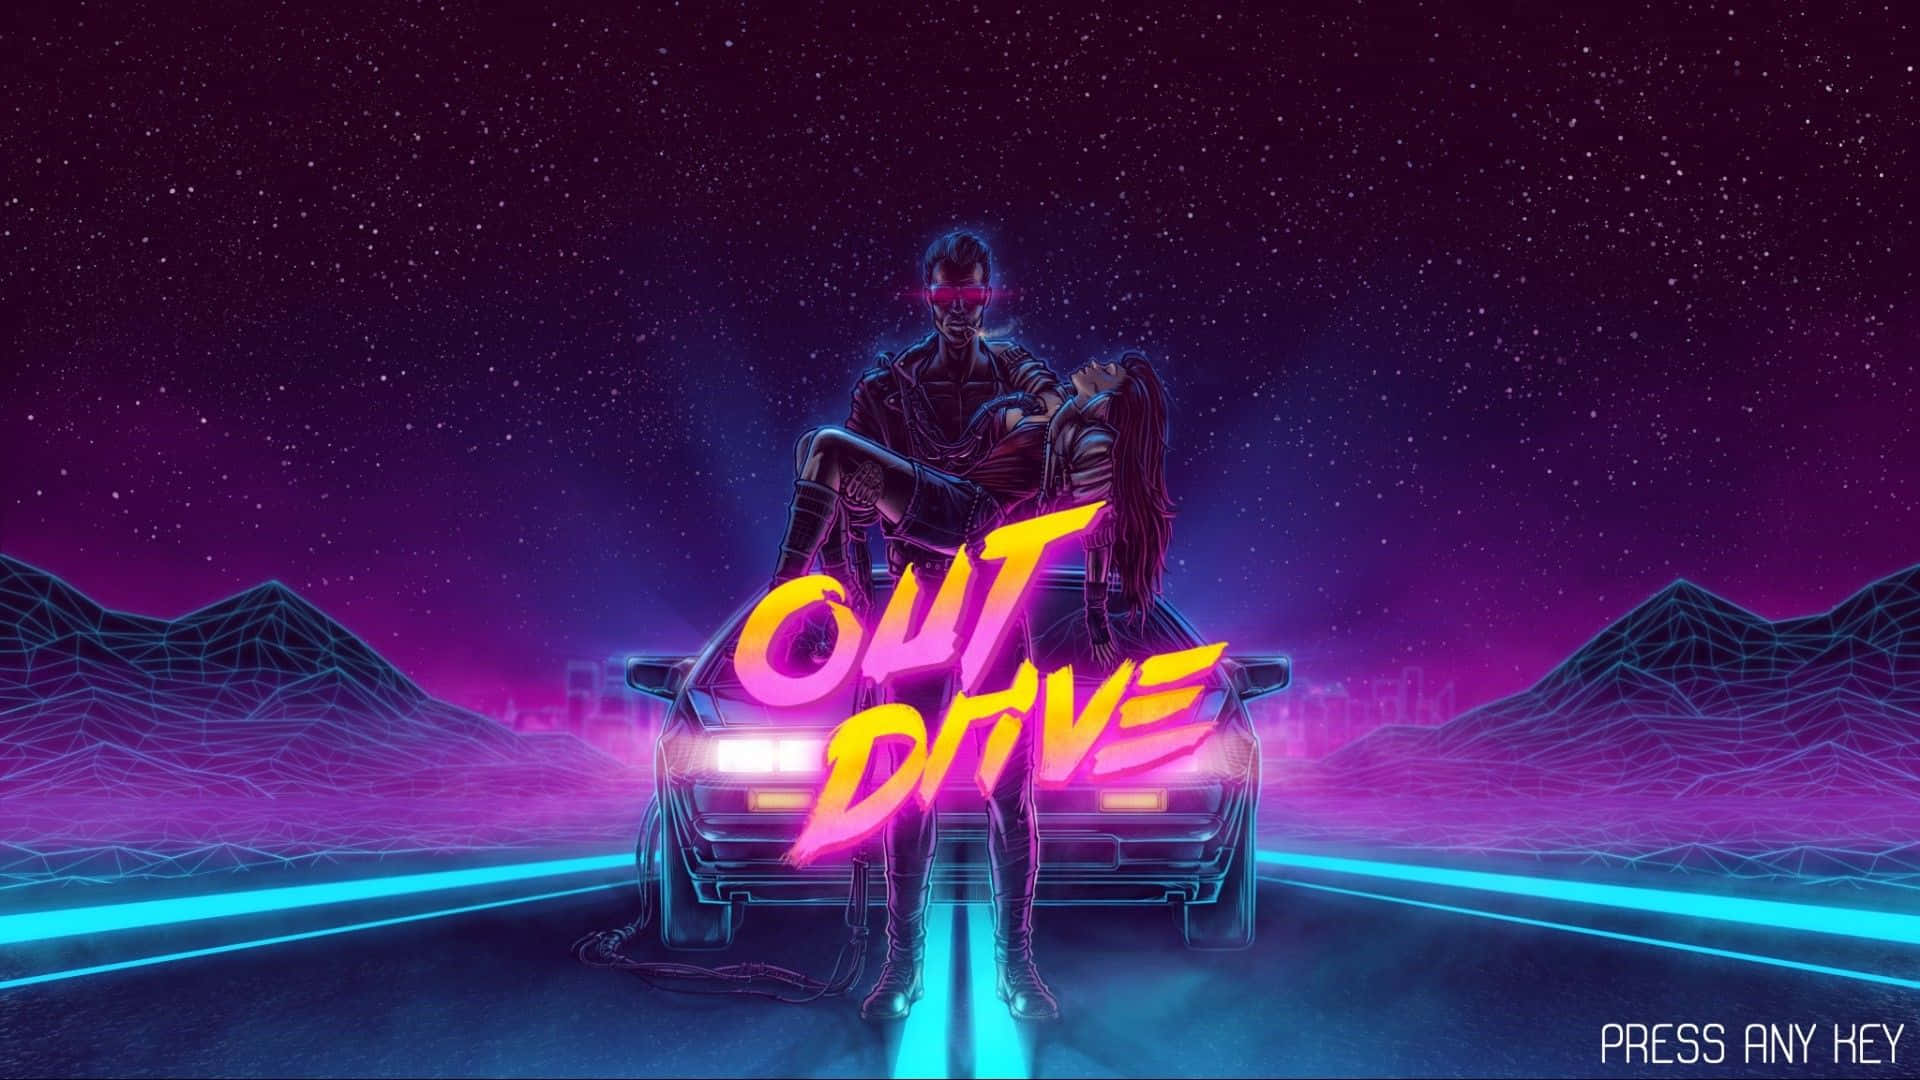 Out Drive is a game about a guy who is driving a car - 80s